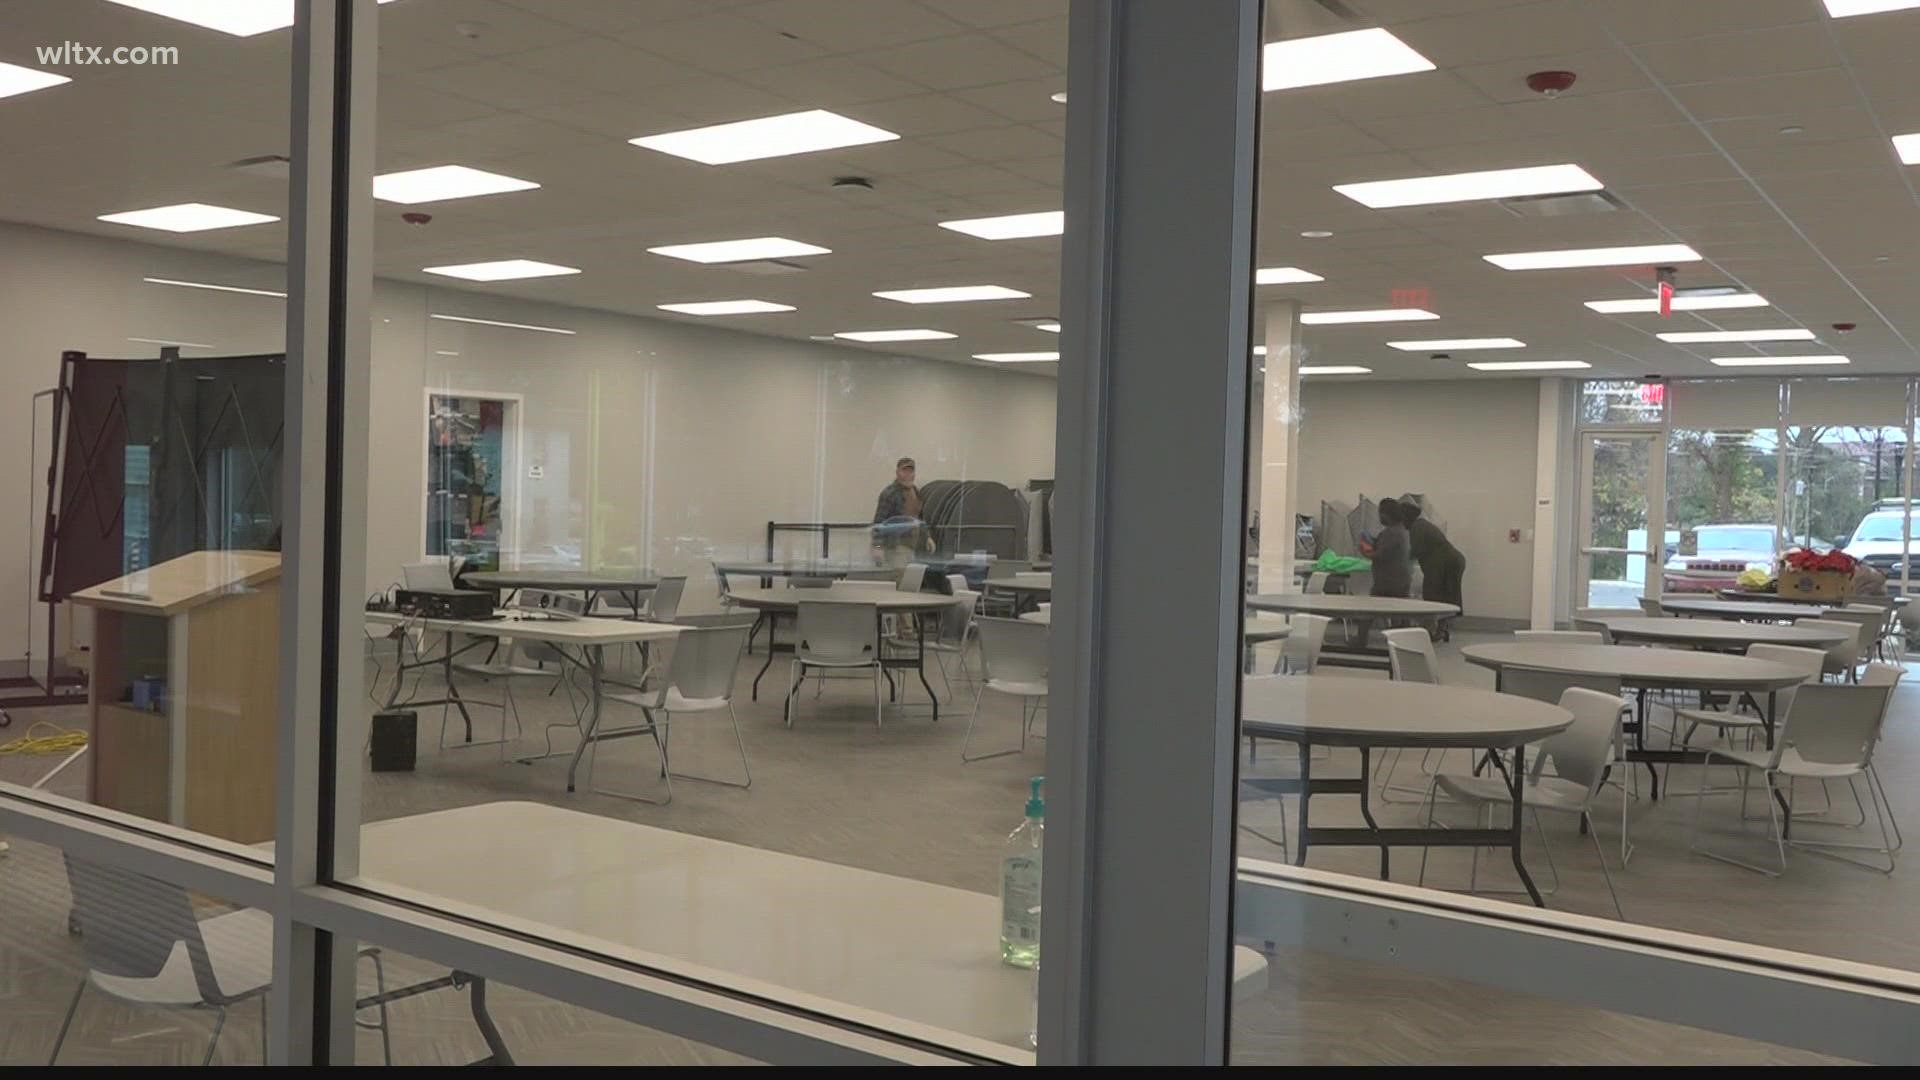 Since the opening of its new location in October, the staff has been able to accommodate more people in need of meeting spaces for non-profit purposes.